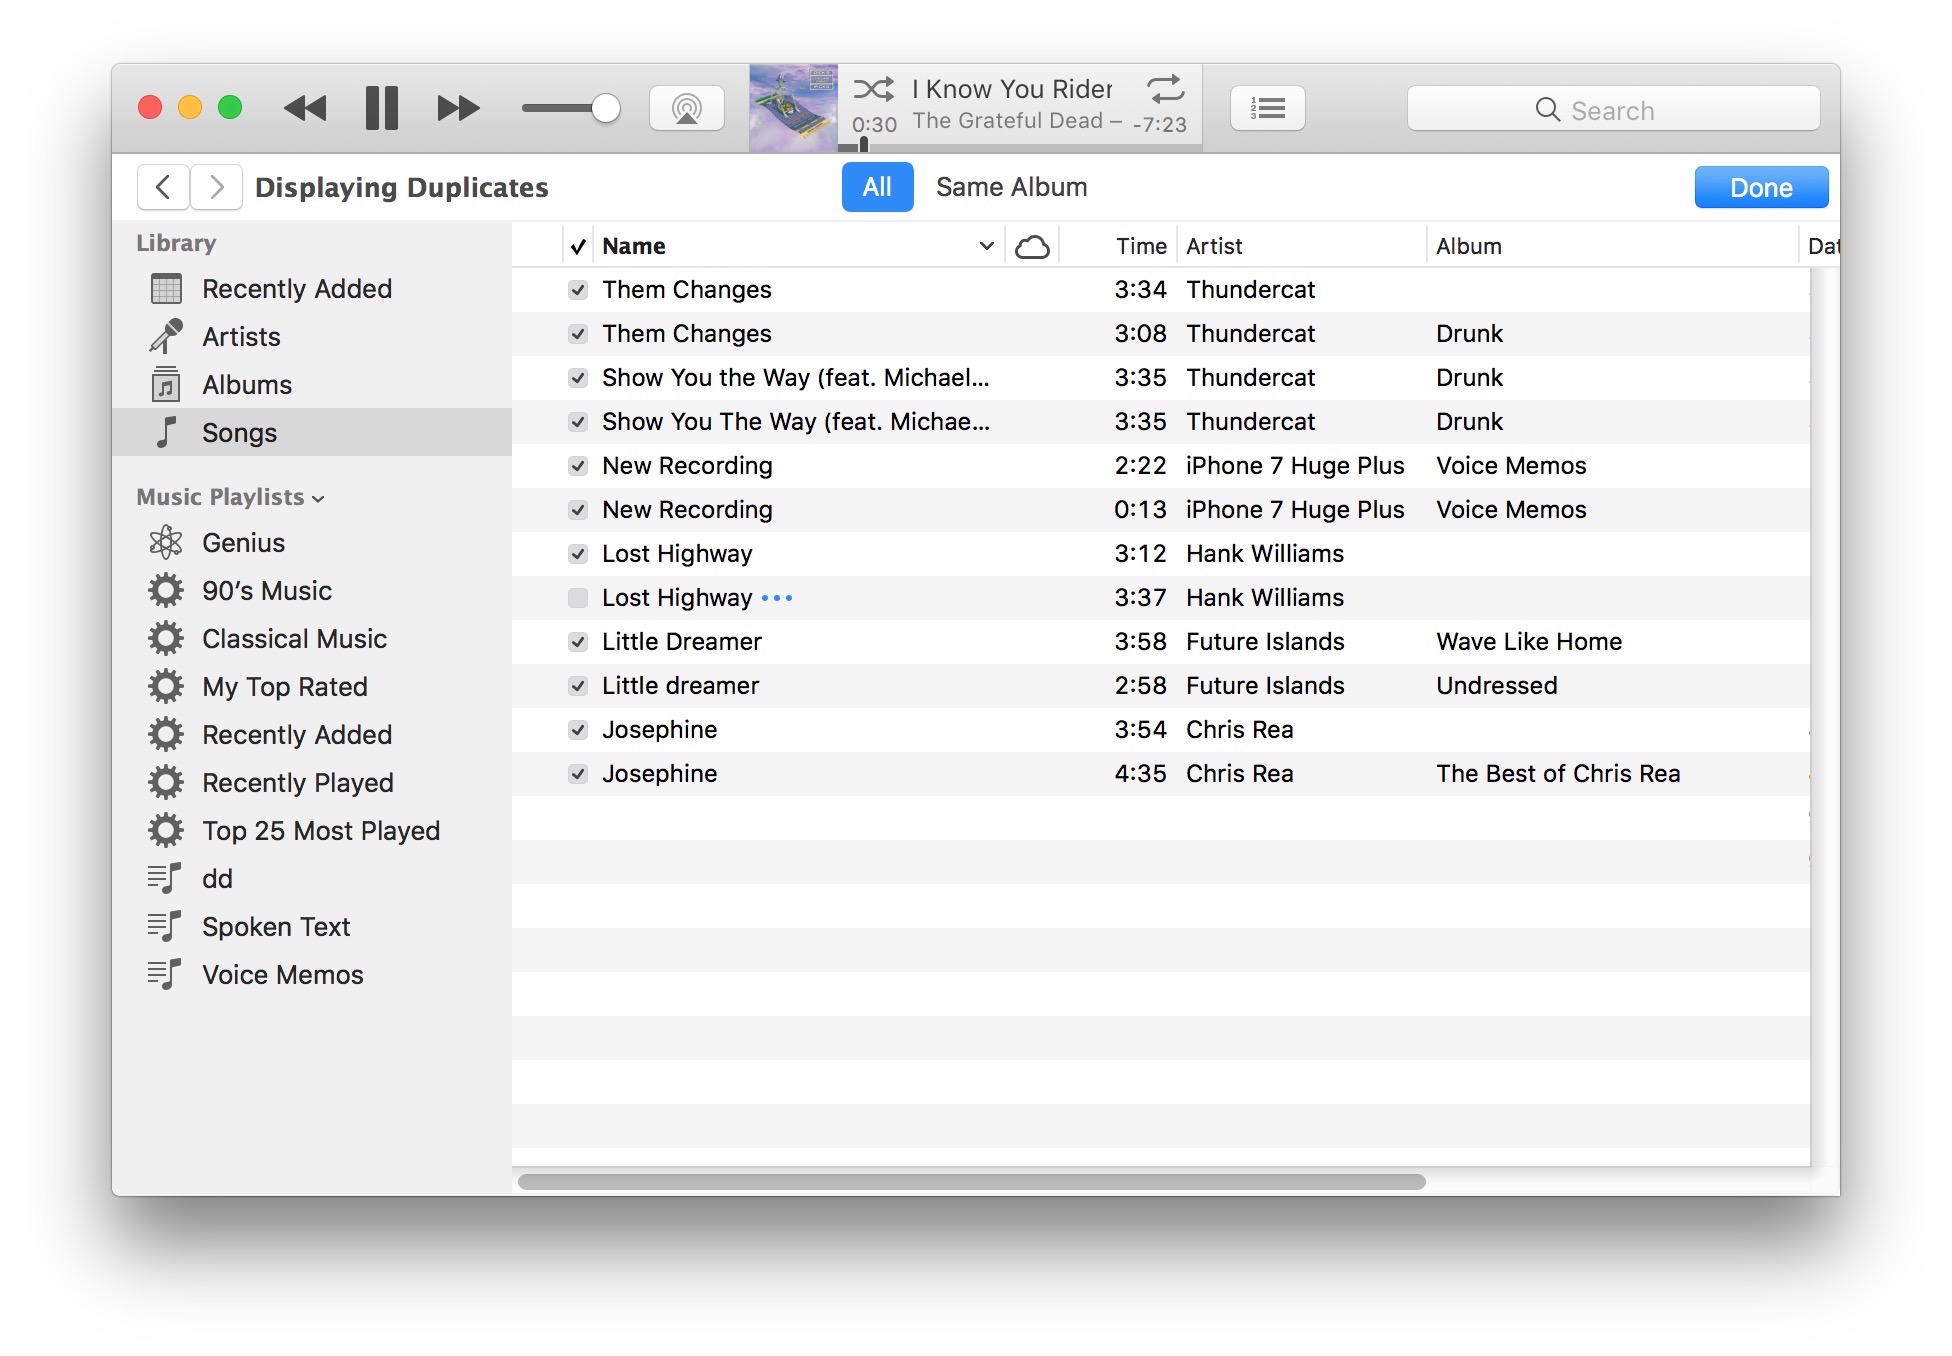 List of potentially duplicate songs found in iTunes